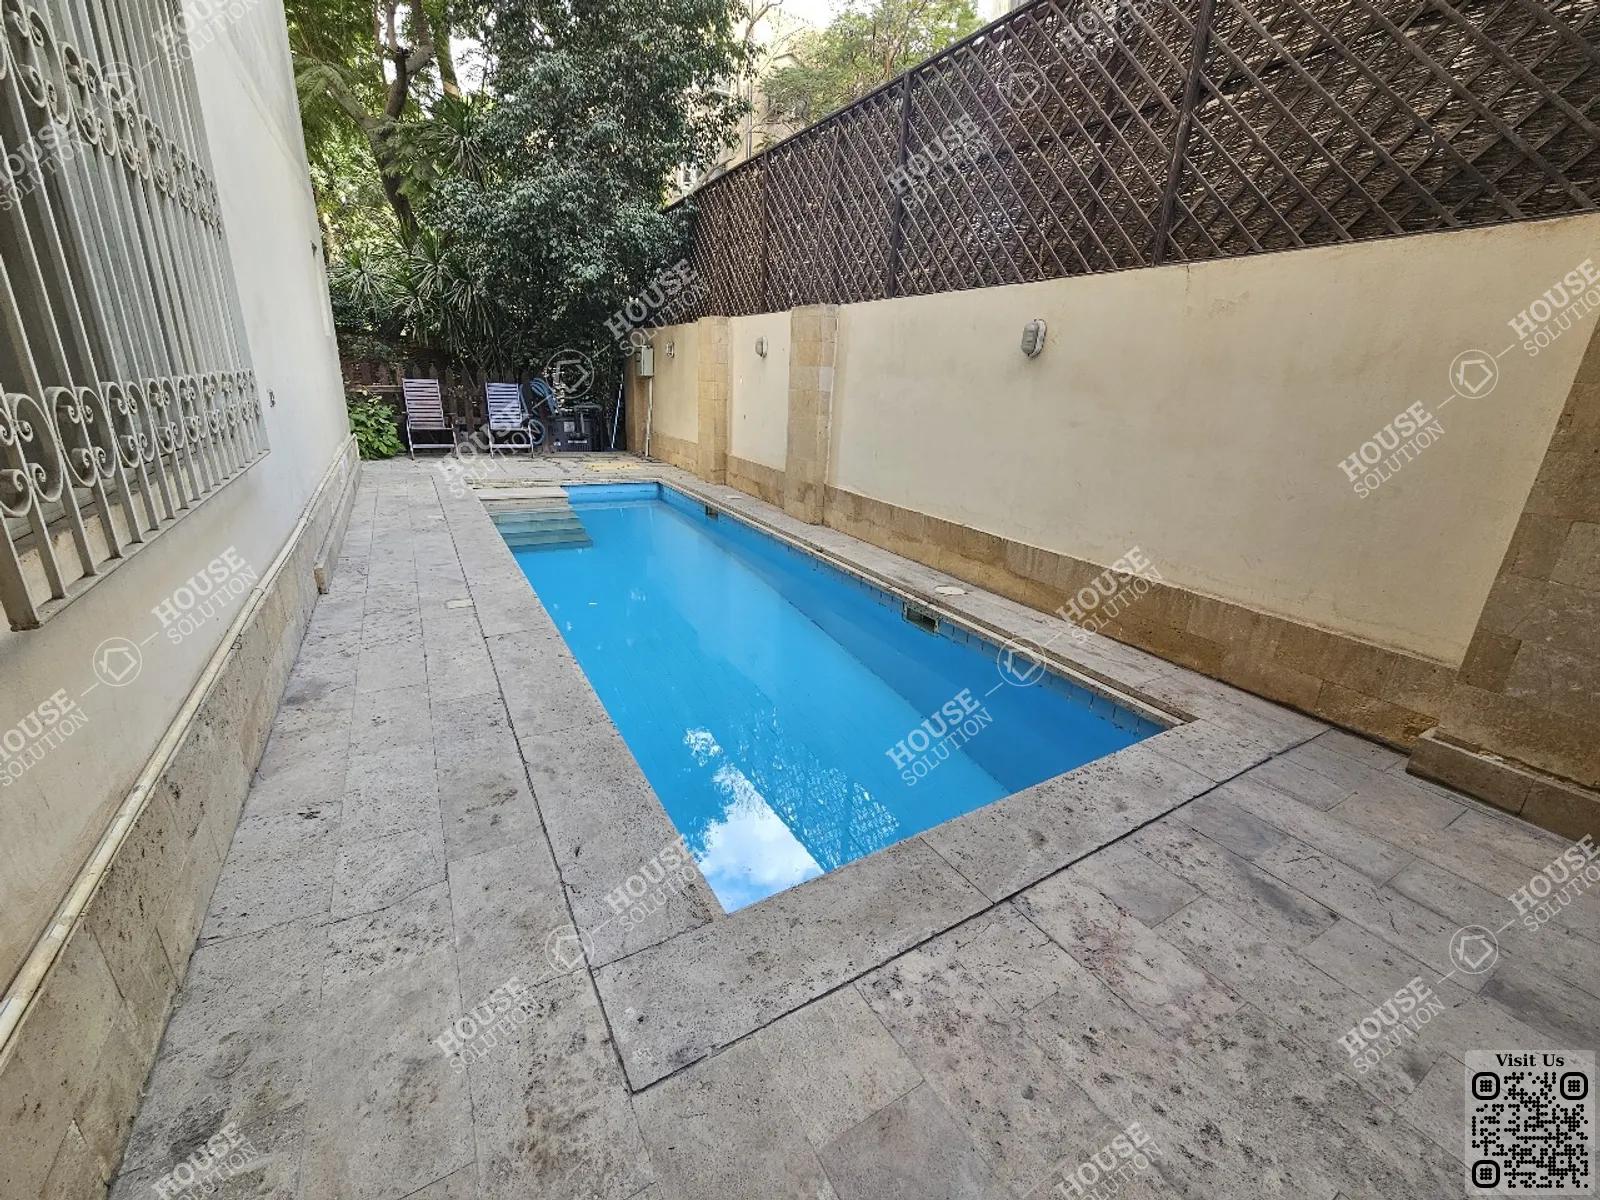 PRIVATE SWIMMING POOL  @ Ground Floors For Rent In Maadi Maadi Sarayat Area: 300 m² consists of 4 Bedrooms 4 Bathrooms Modern furnished 5 stars #5800-0